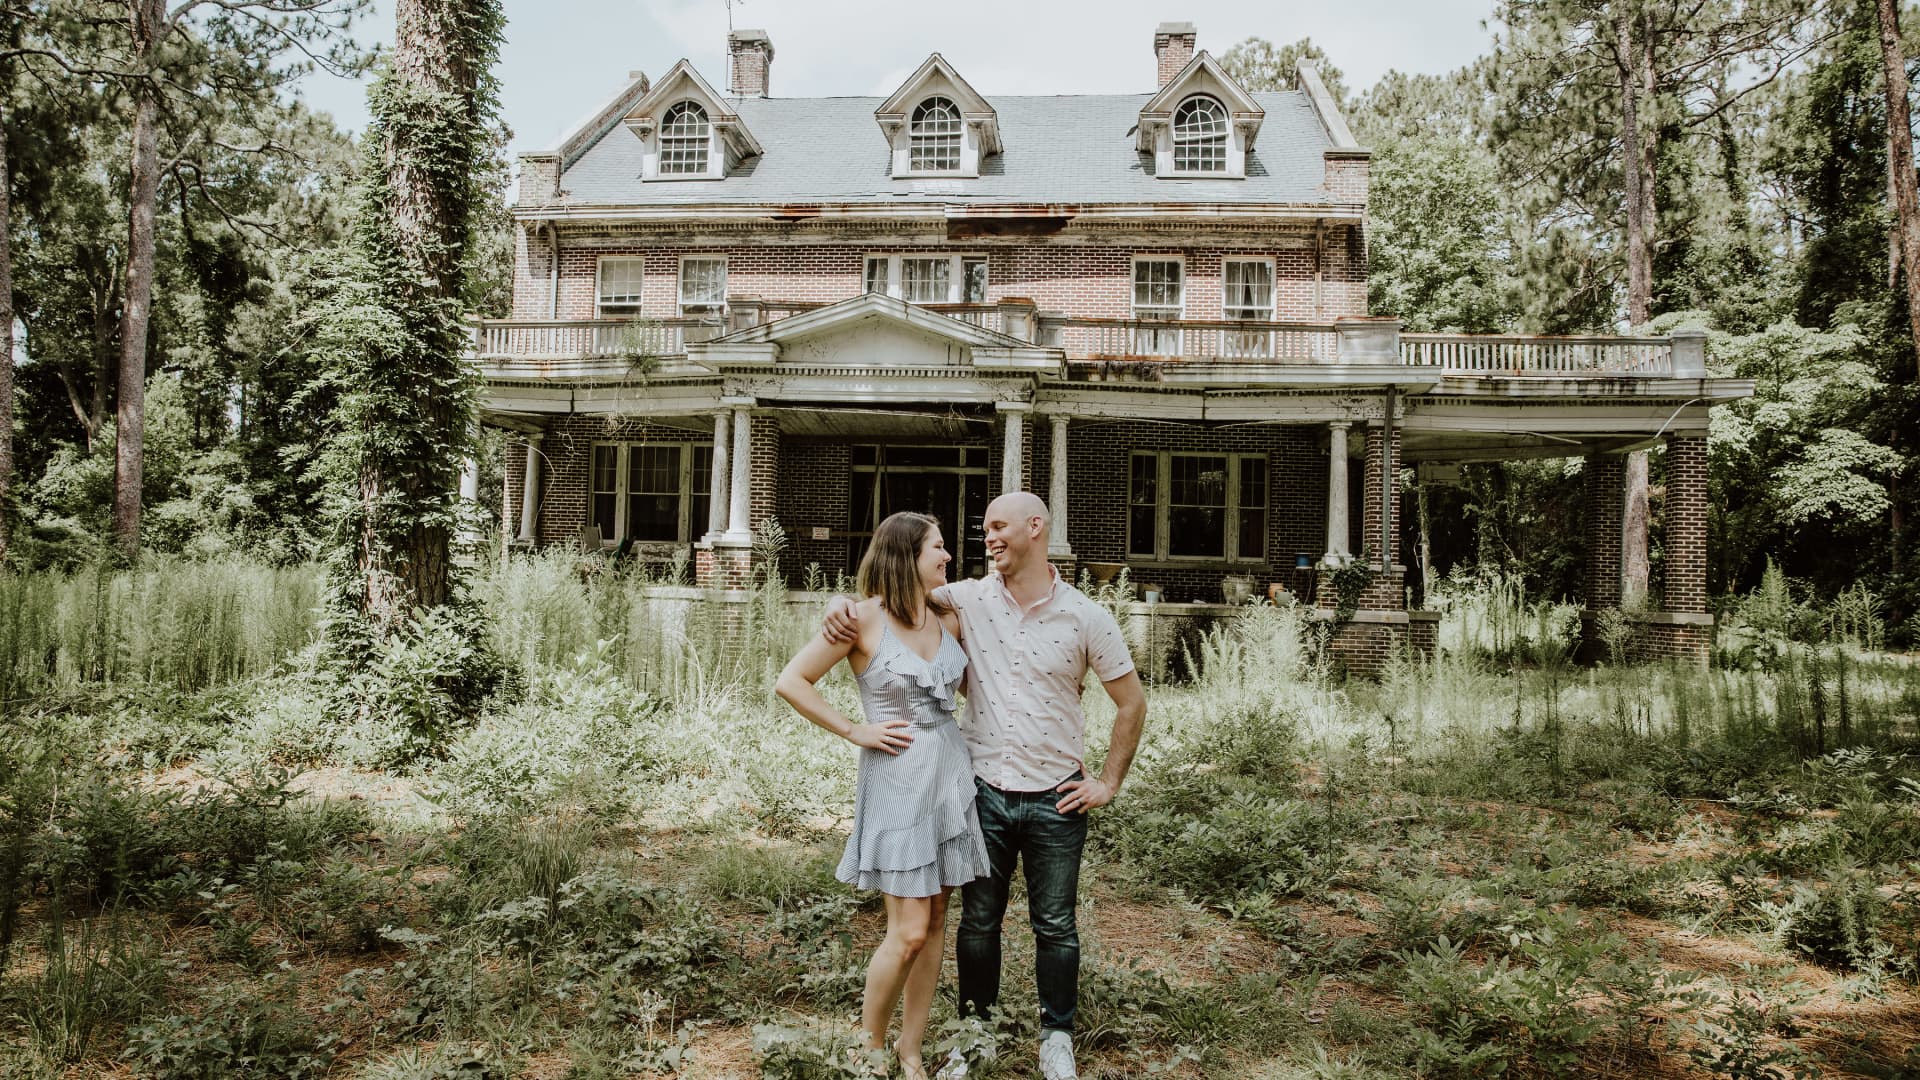 This couple bought and renovated a 109-year-old mansion for less than 0,000. Now it’s worth 0,000–take a look inside